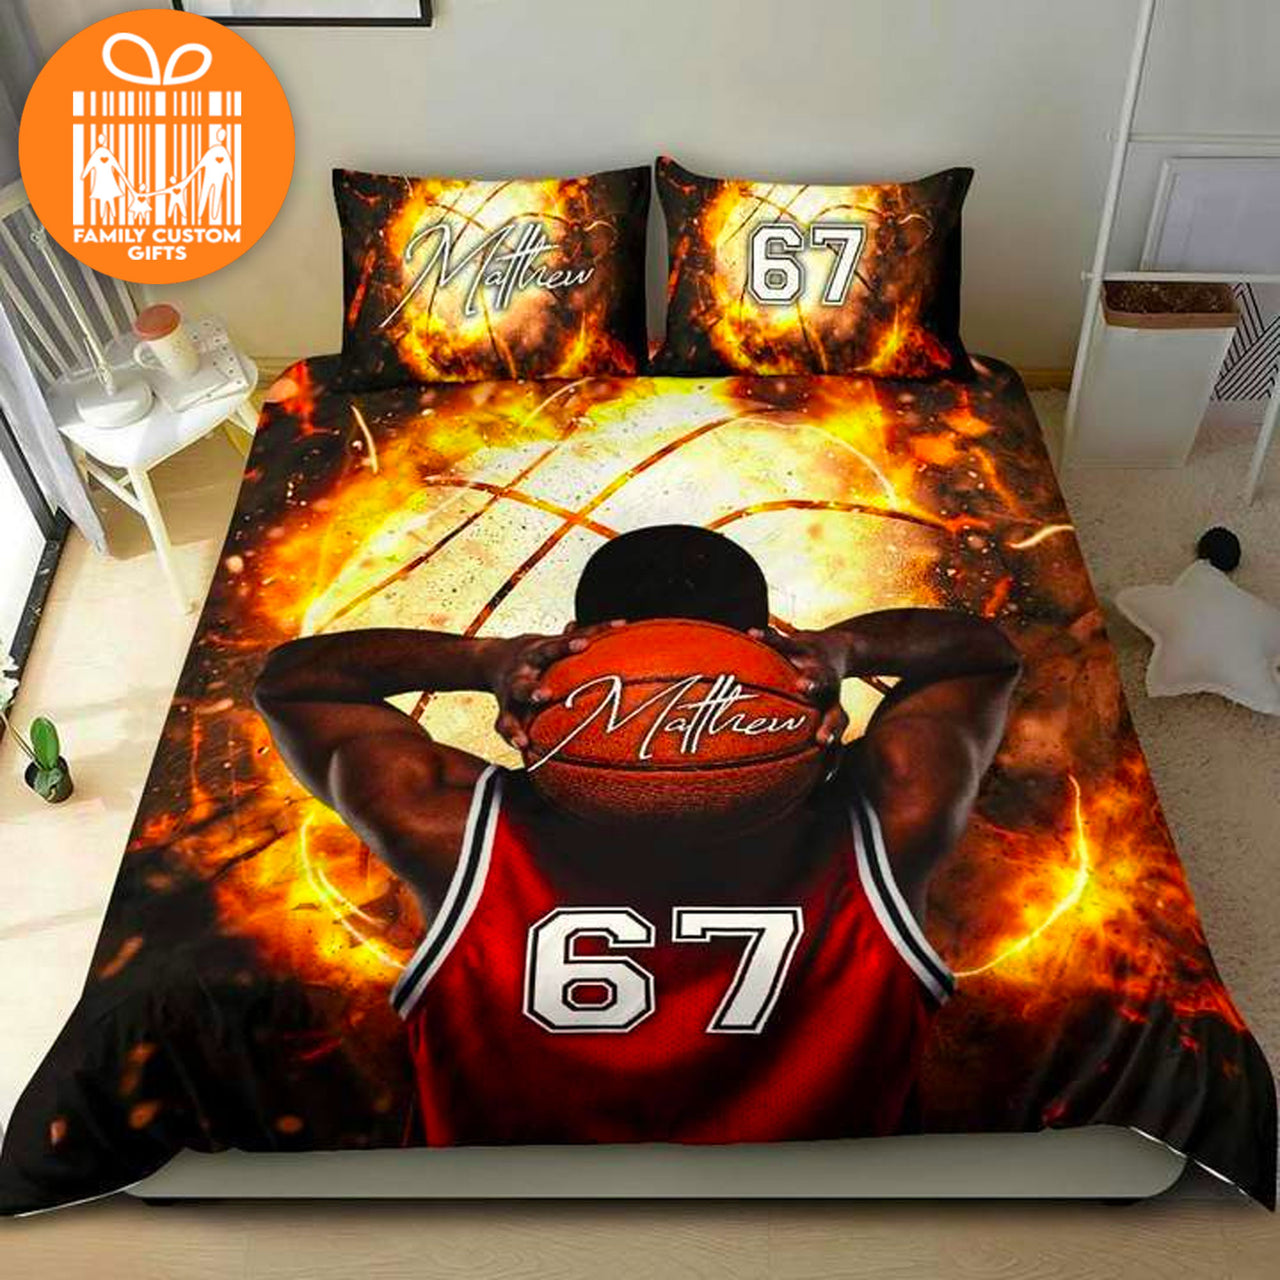 Custom Quilt Sets for Kids Teens Adult Basketball Player Personalized Premium Quilt Bedding